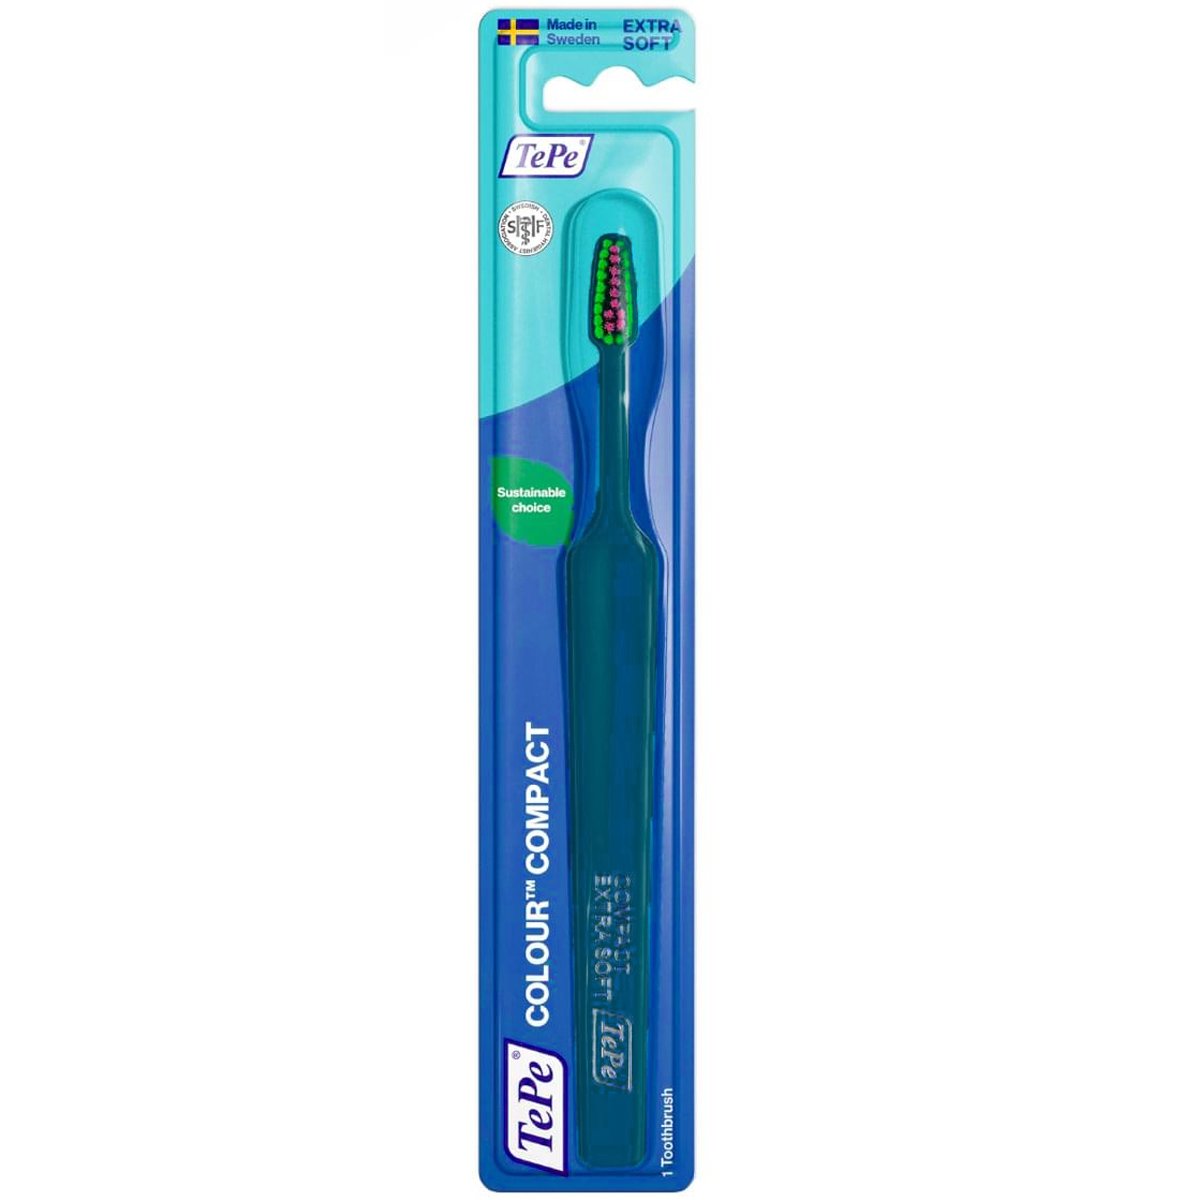 TePe Colour Compact Extra Soft Toothbrush Πολύ Μαλακή Οδοντόβουρτσα για Αποτελεσματικό & Απαλό Καθαρισμό 1 Τεμάχιο – Μπλε